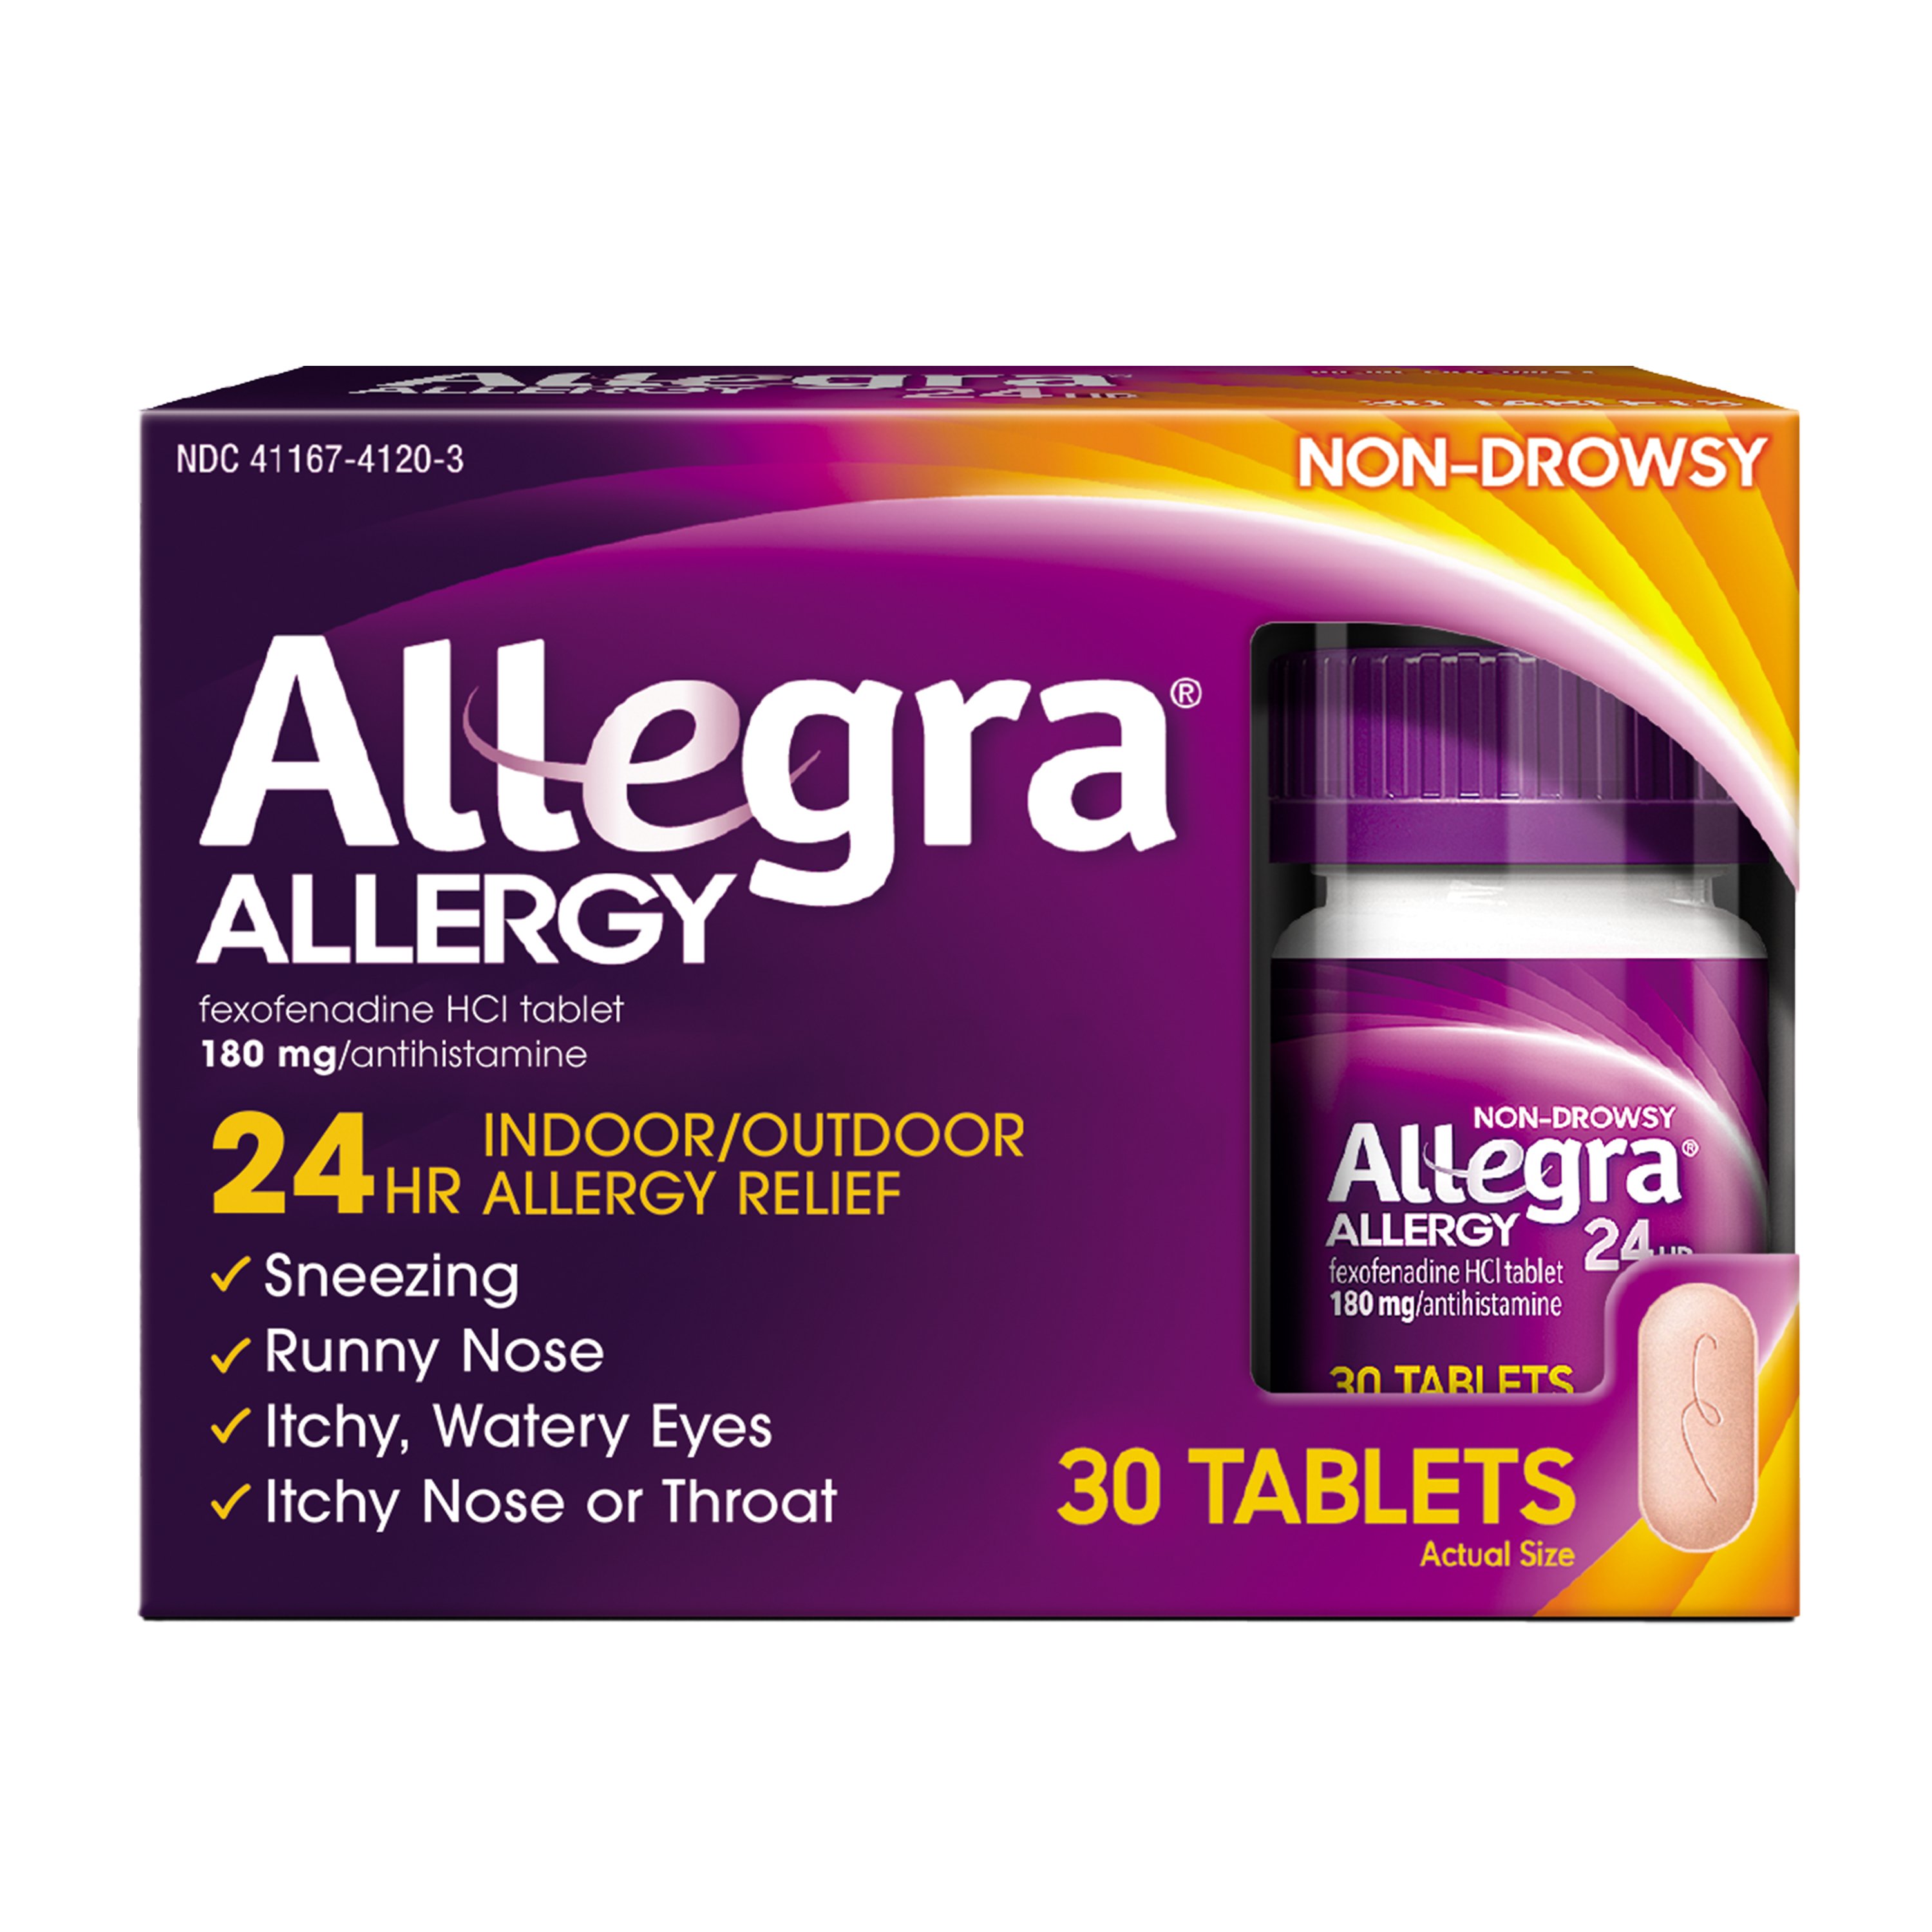 what are the allergic reactions to allegra